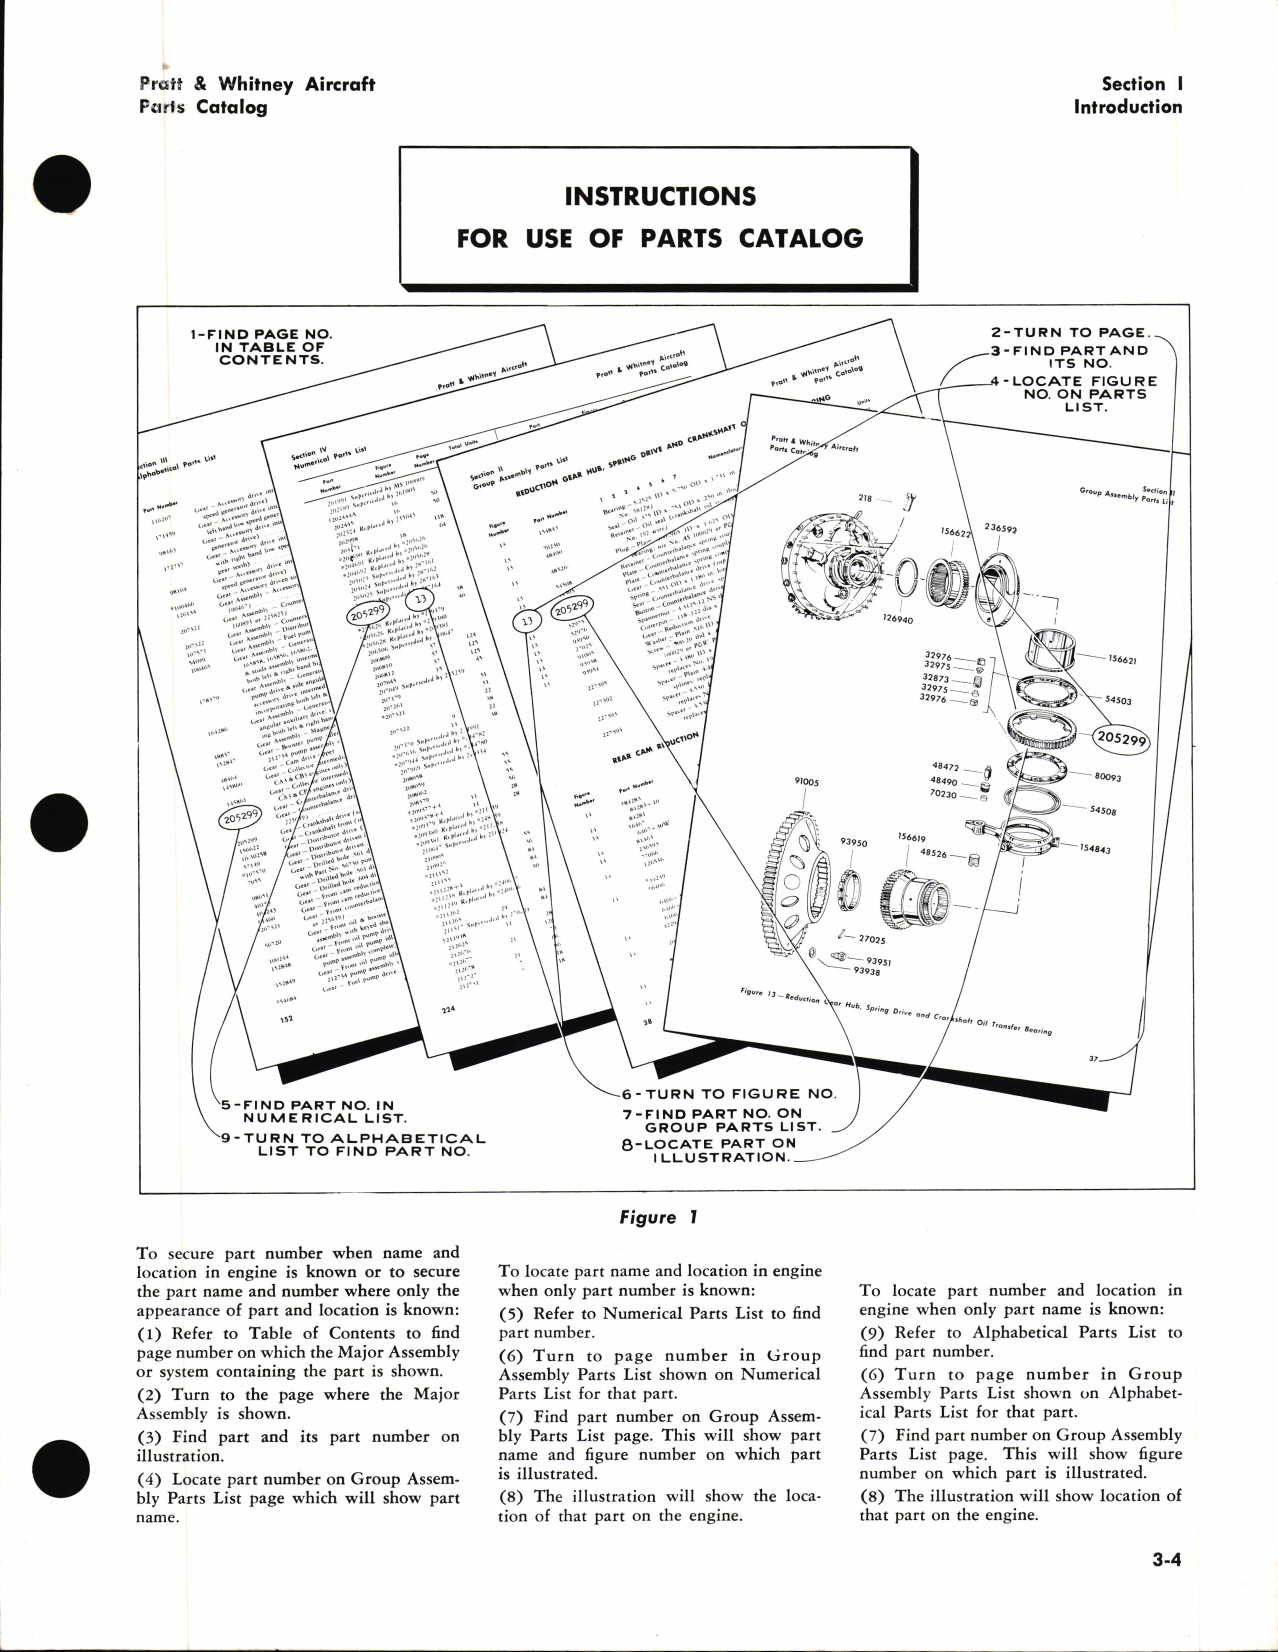 Sample page 7 from AirCorps Library document: R-2800 Double Wasp Parts Catalog